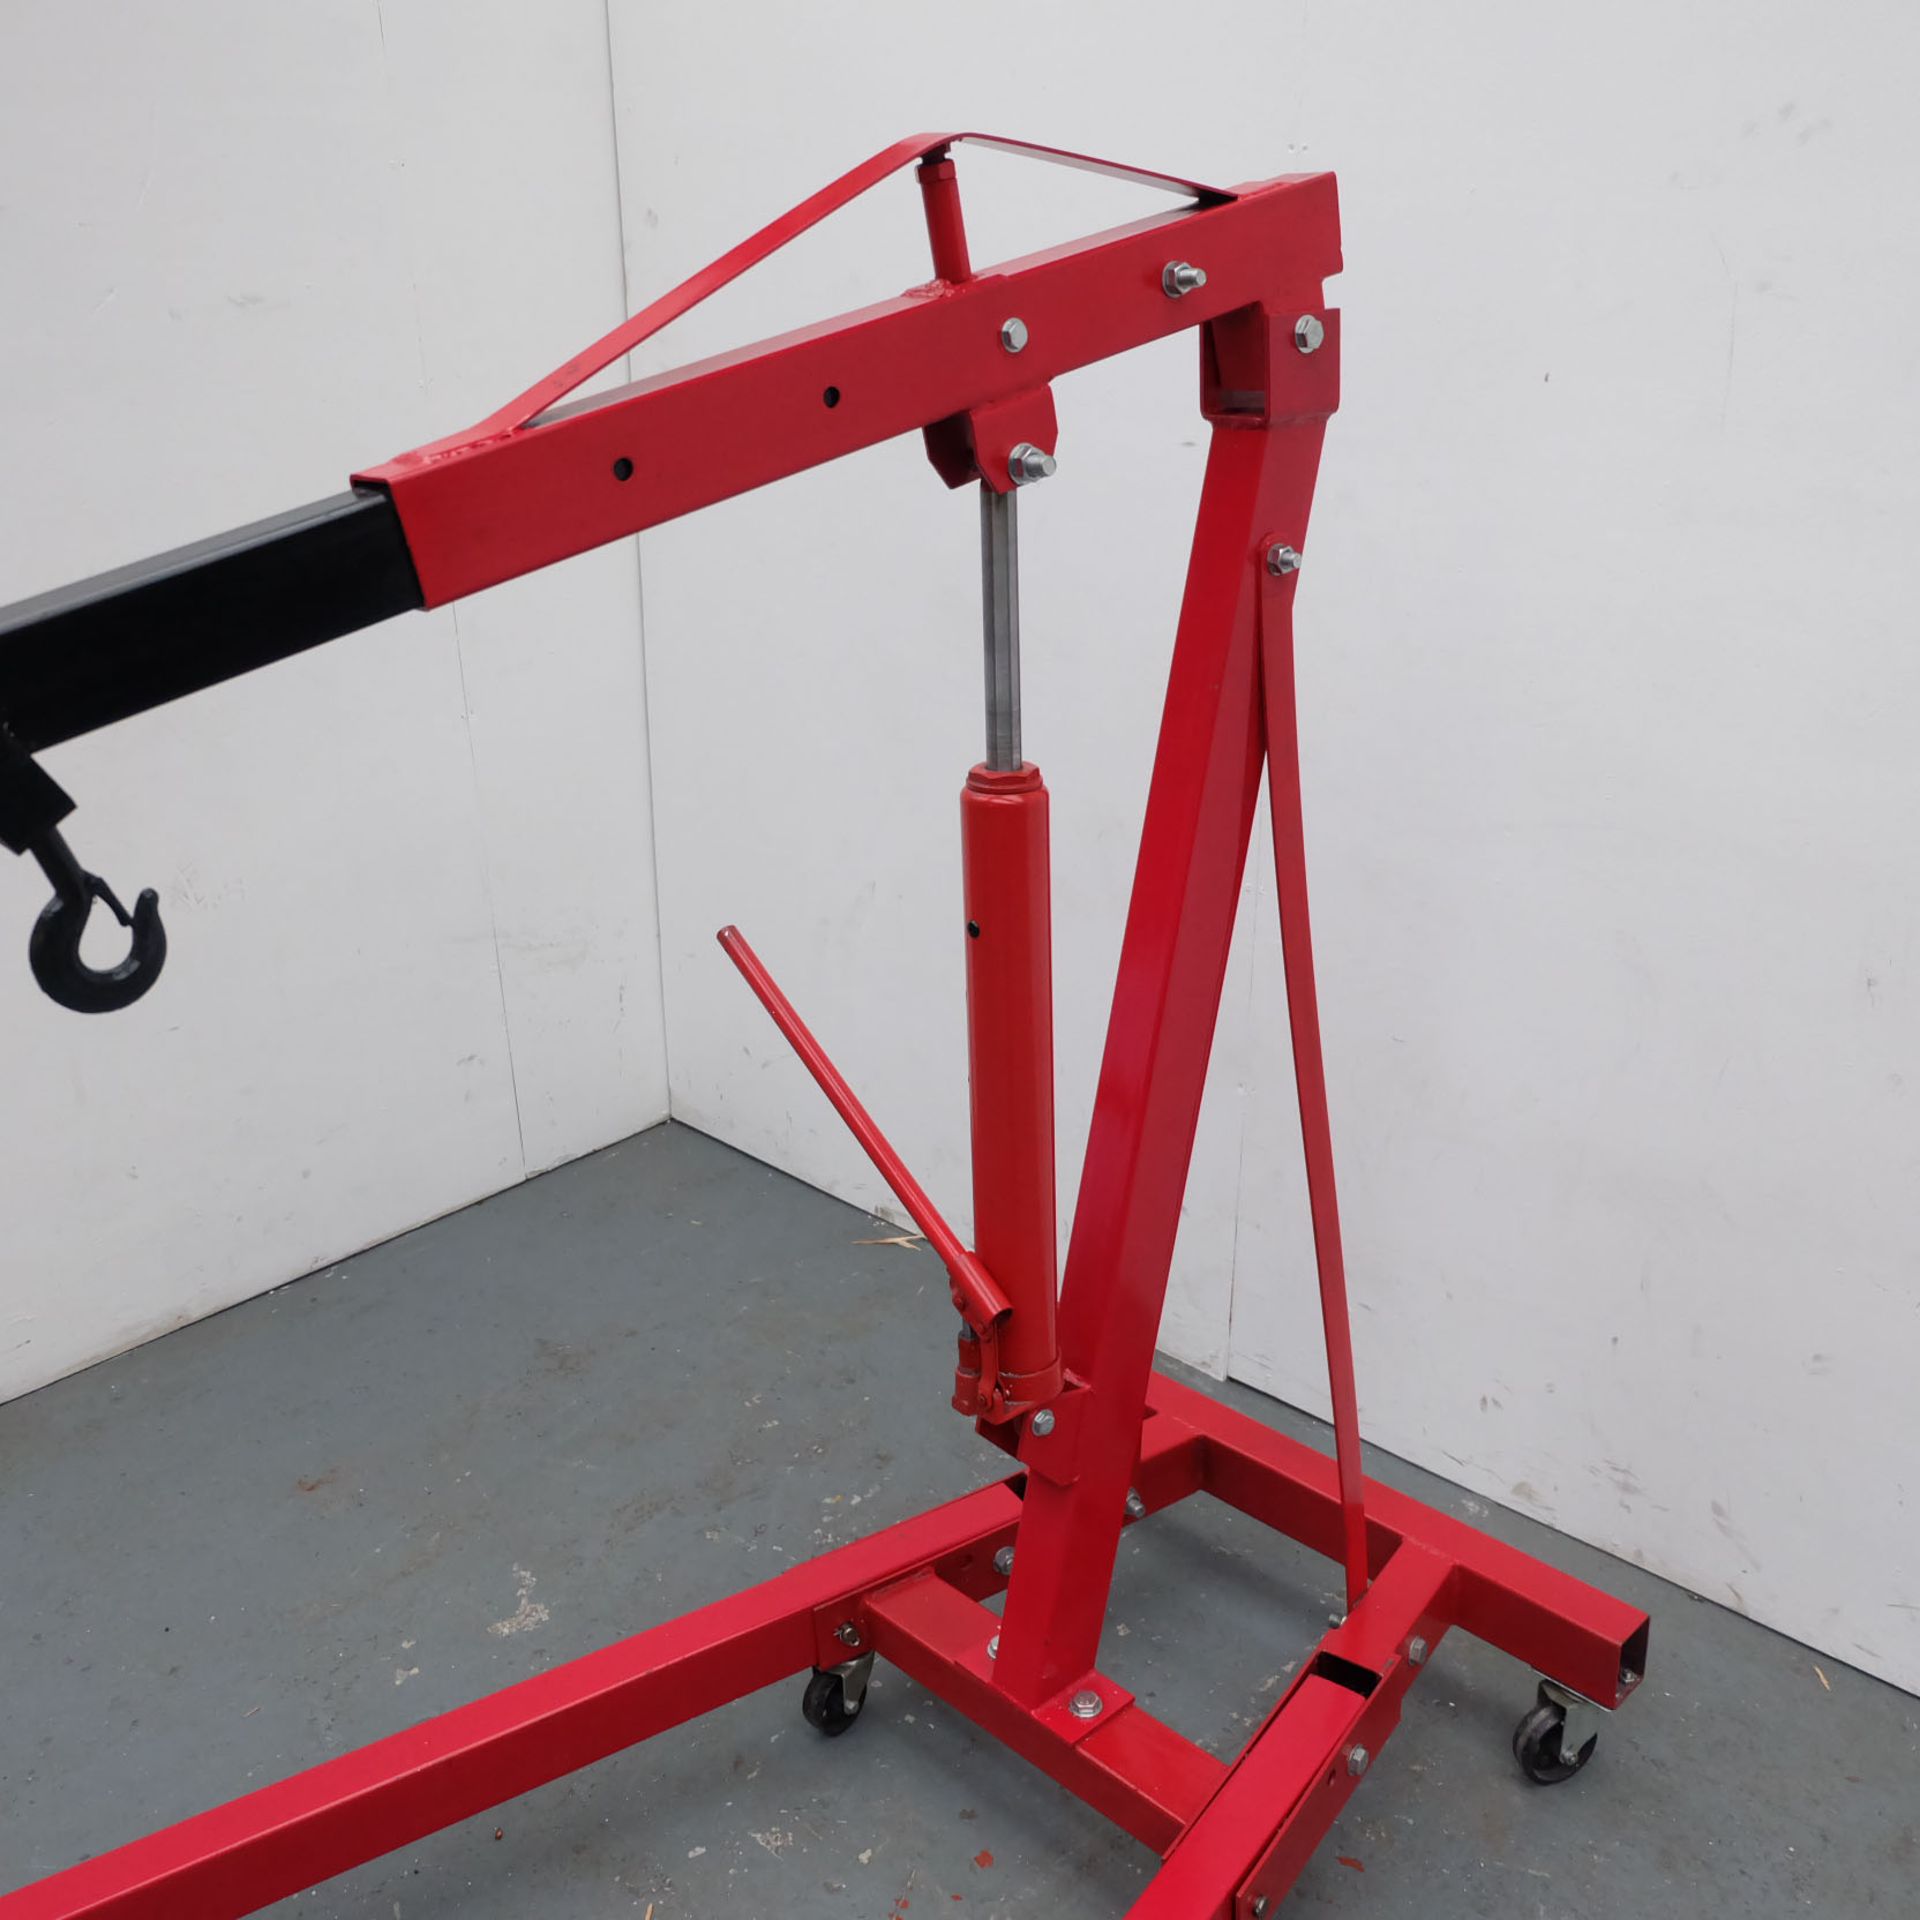 2 Ton Automotive Engine Lift. Four Jib Positions. 500Kg Lift With Jib Fully Extended. - Image 3 of 7